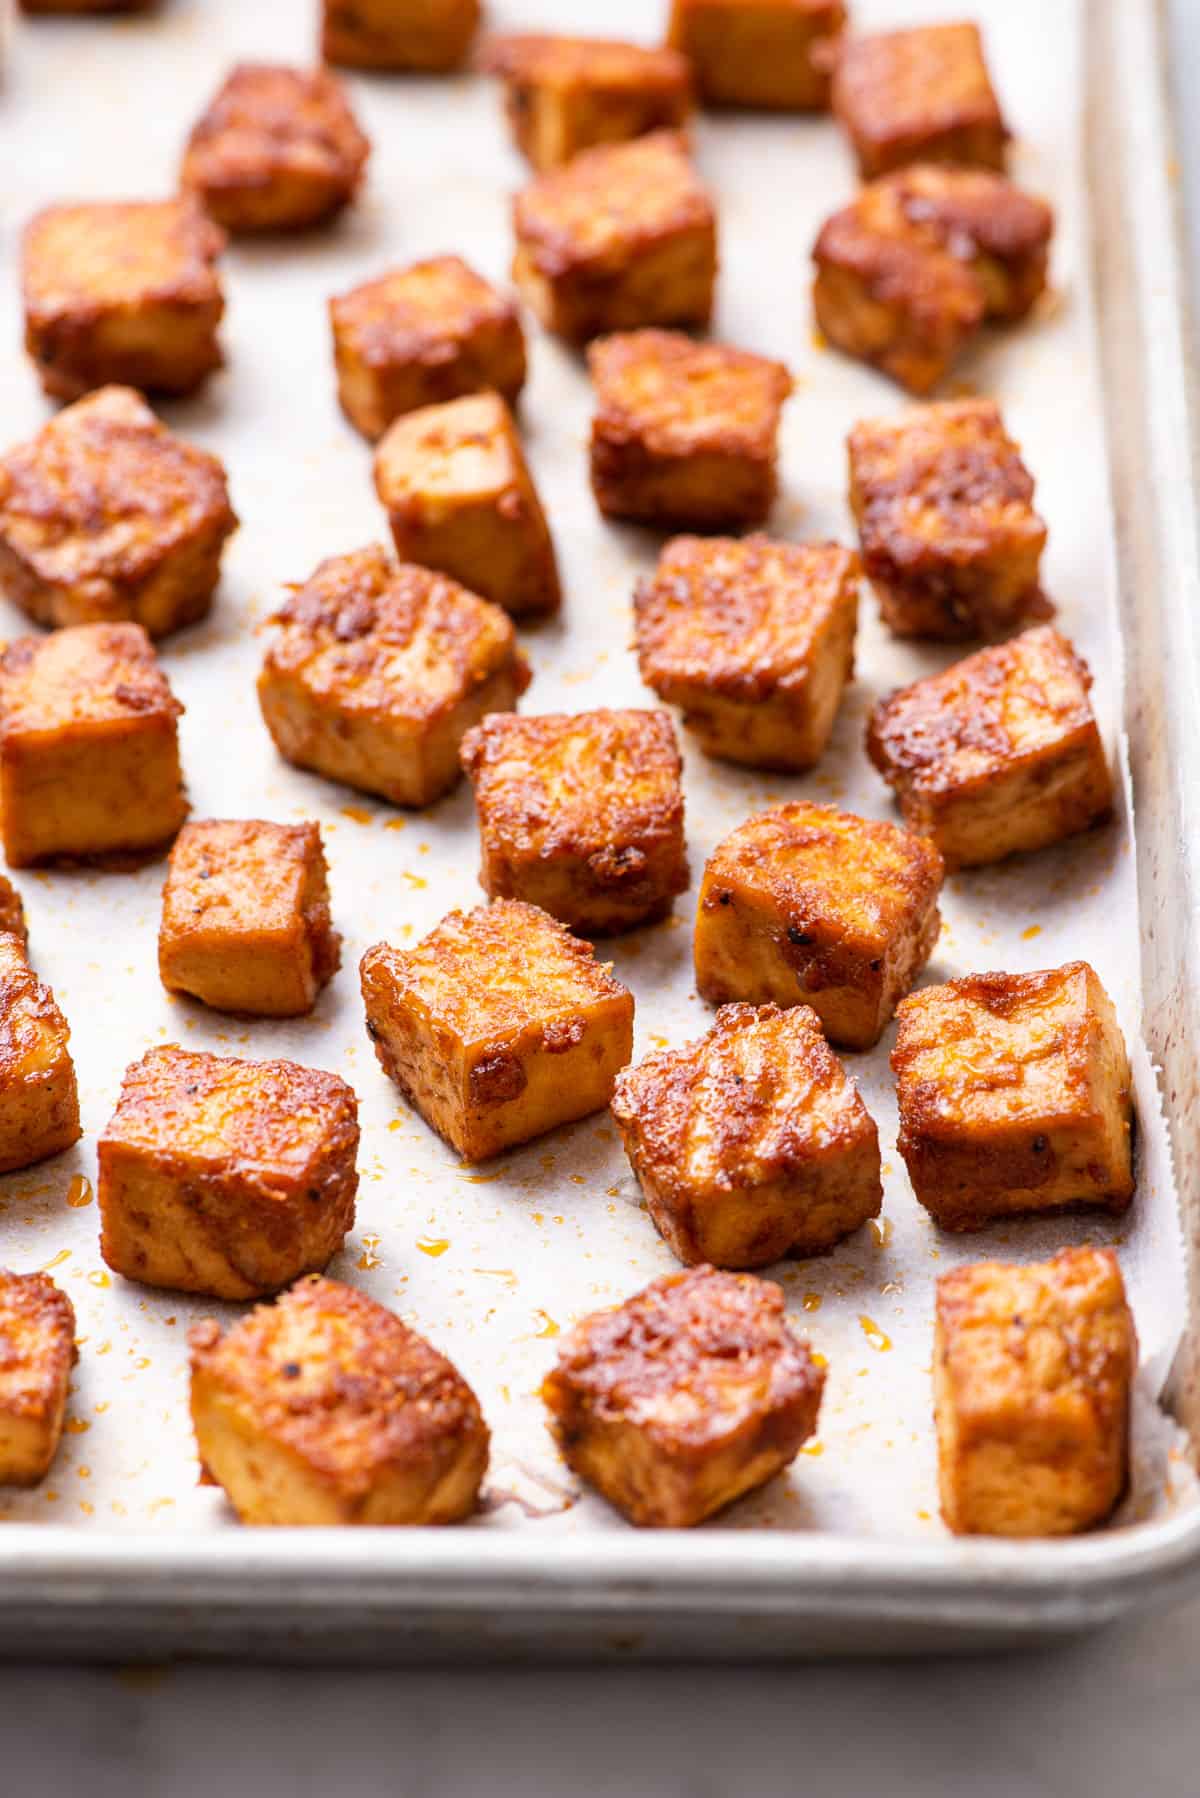 Meal prep tofu cubes baked in a salty-sweet glaze.